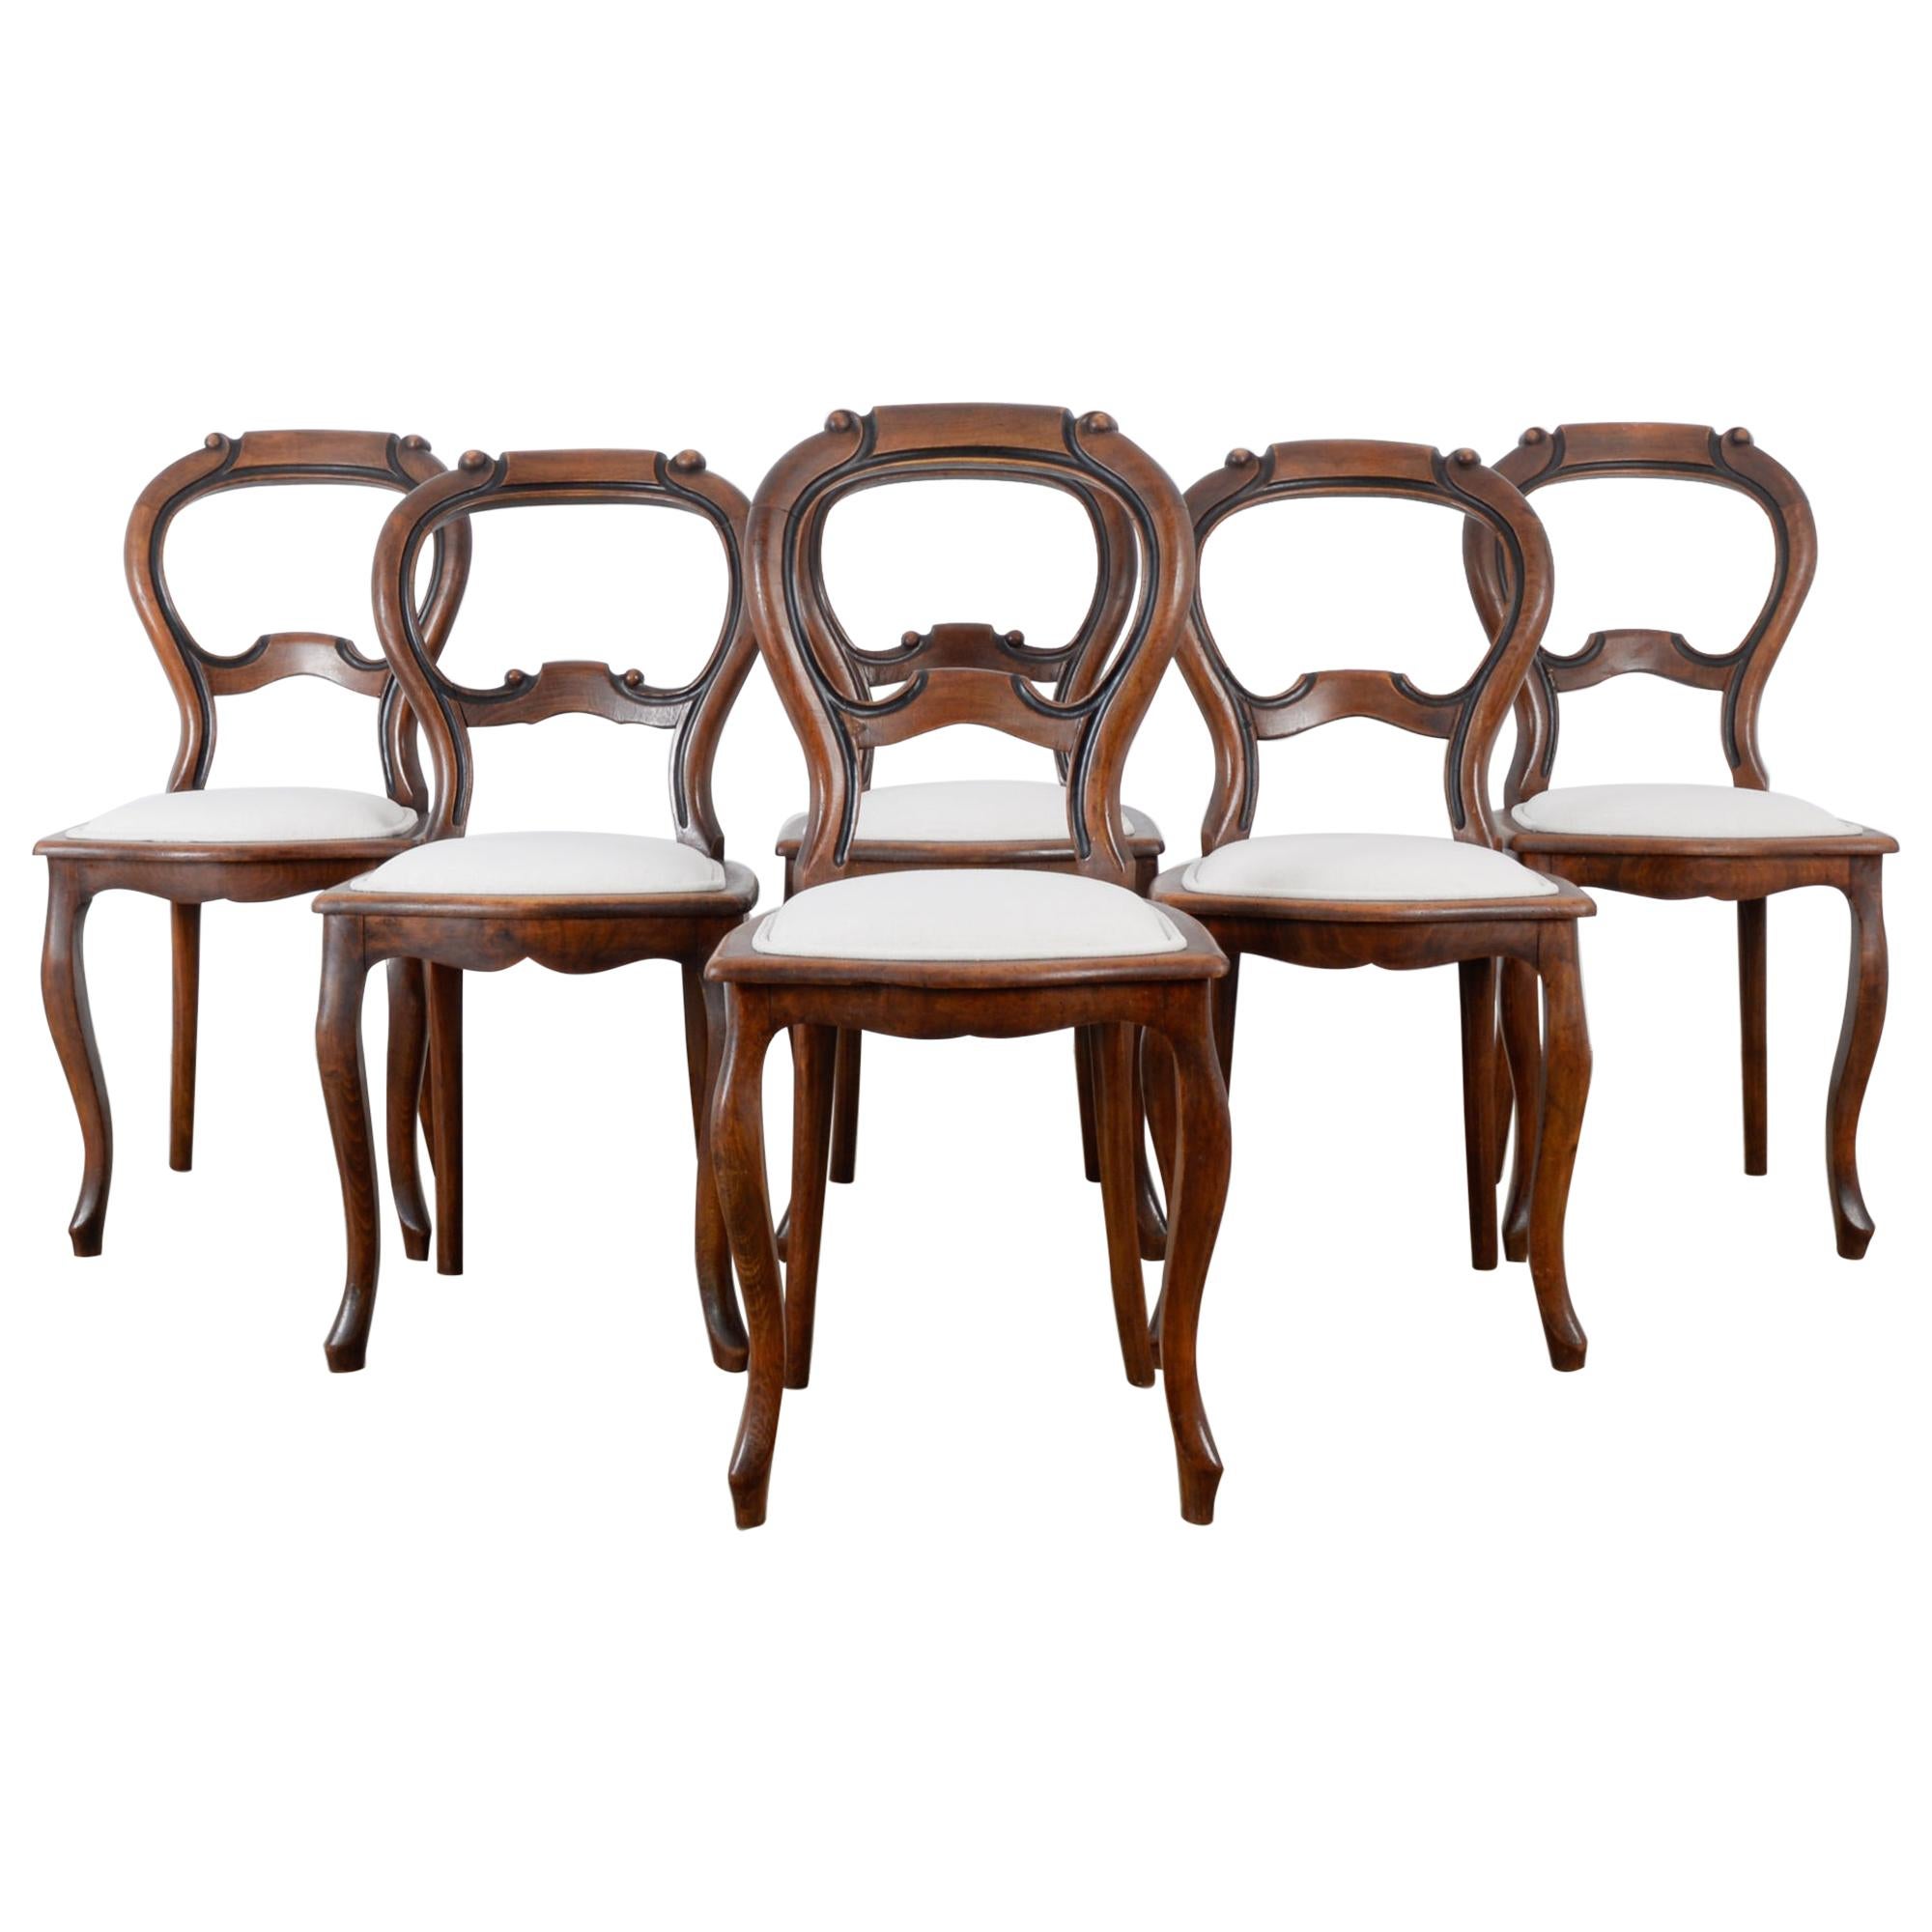 1900s Wooden Dining Chairs, Set of Six